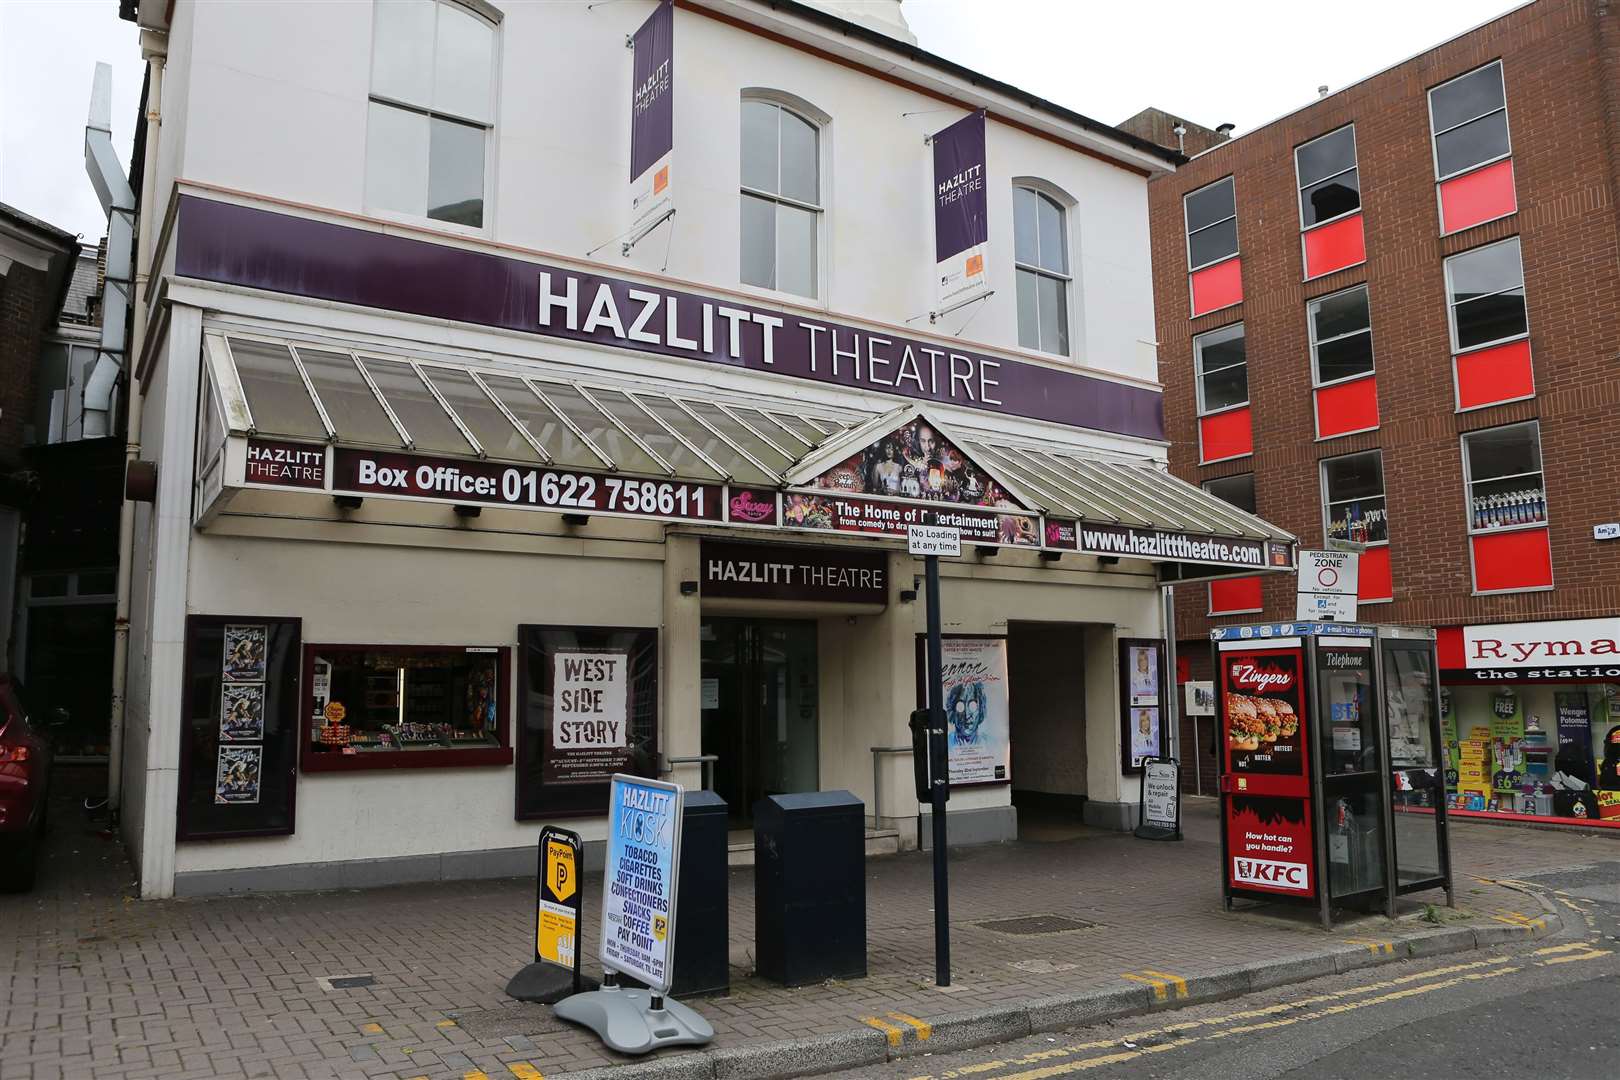 There was praise for The Hazlitt - but is it good enough?